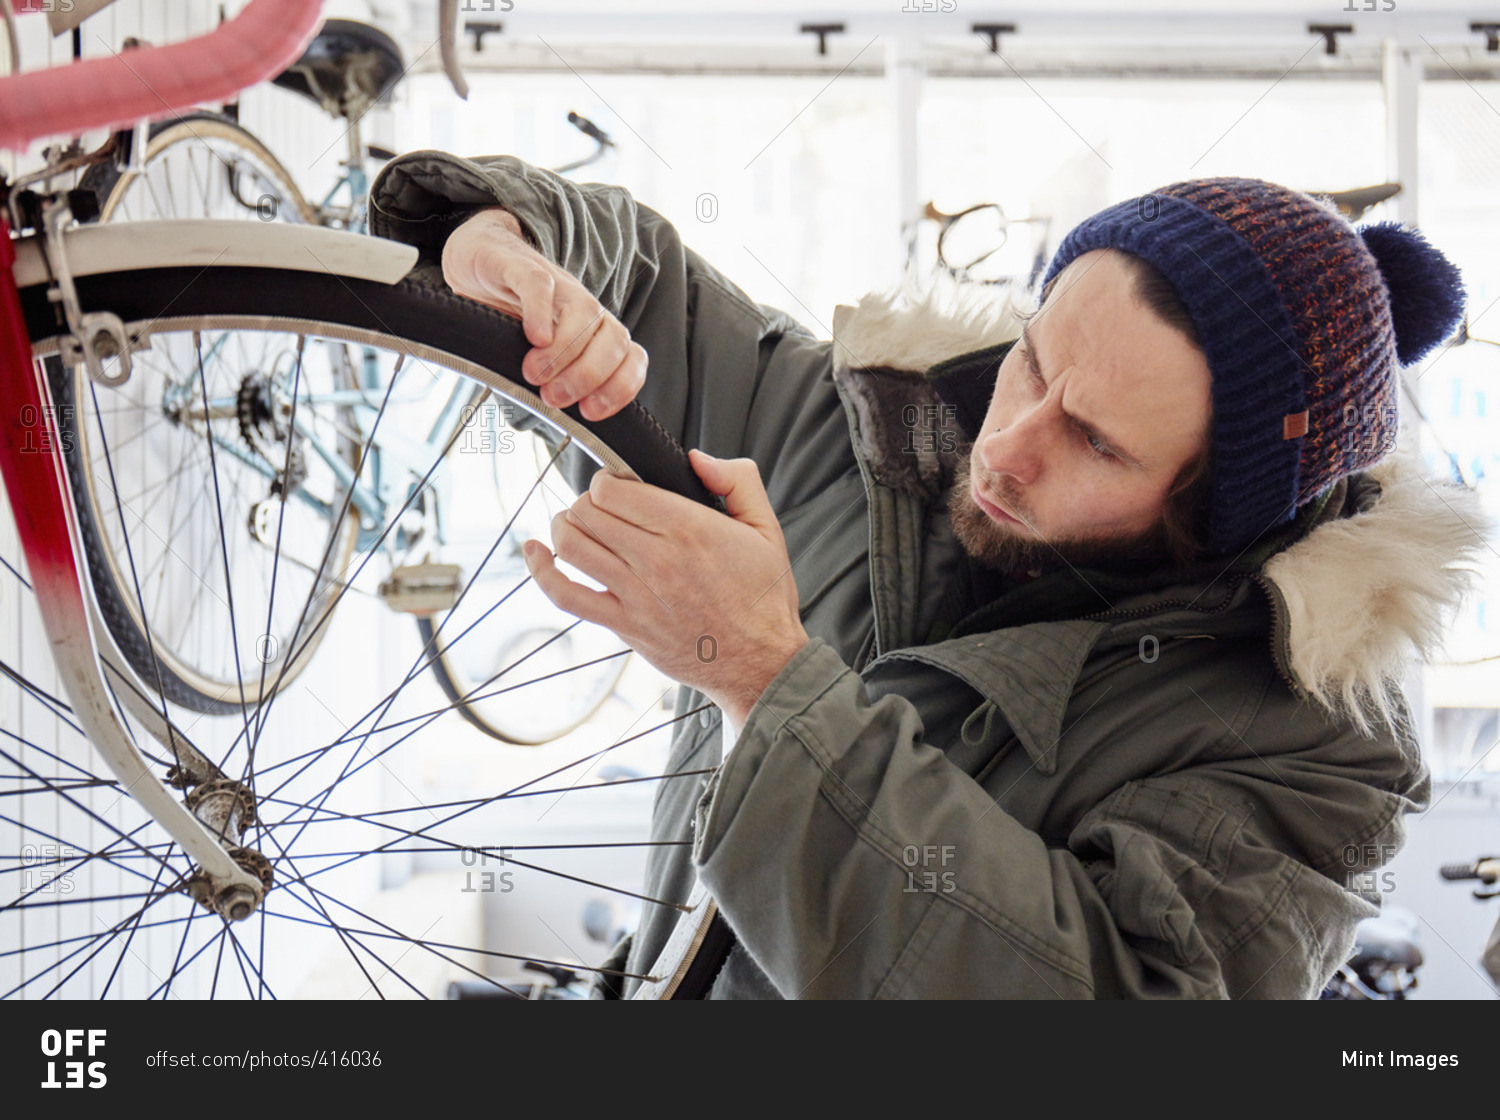 A young man working in a cycle shop, repairing a bicycle